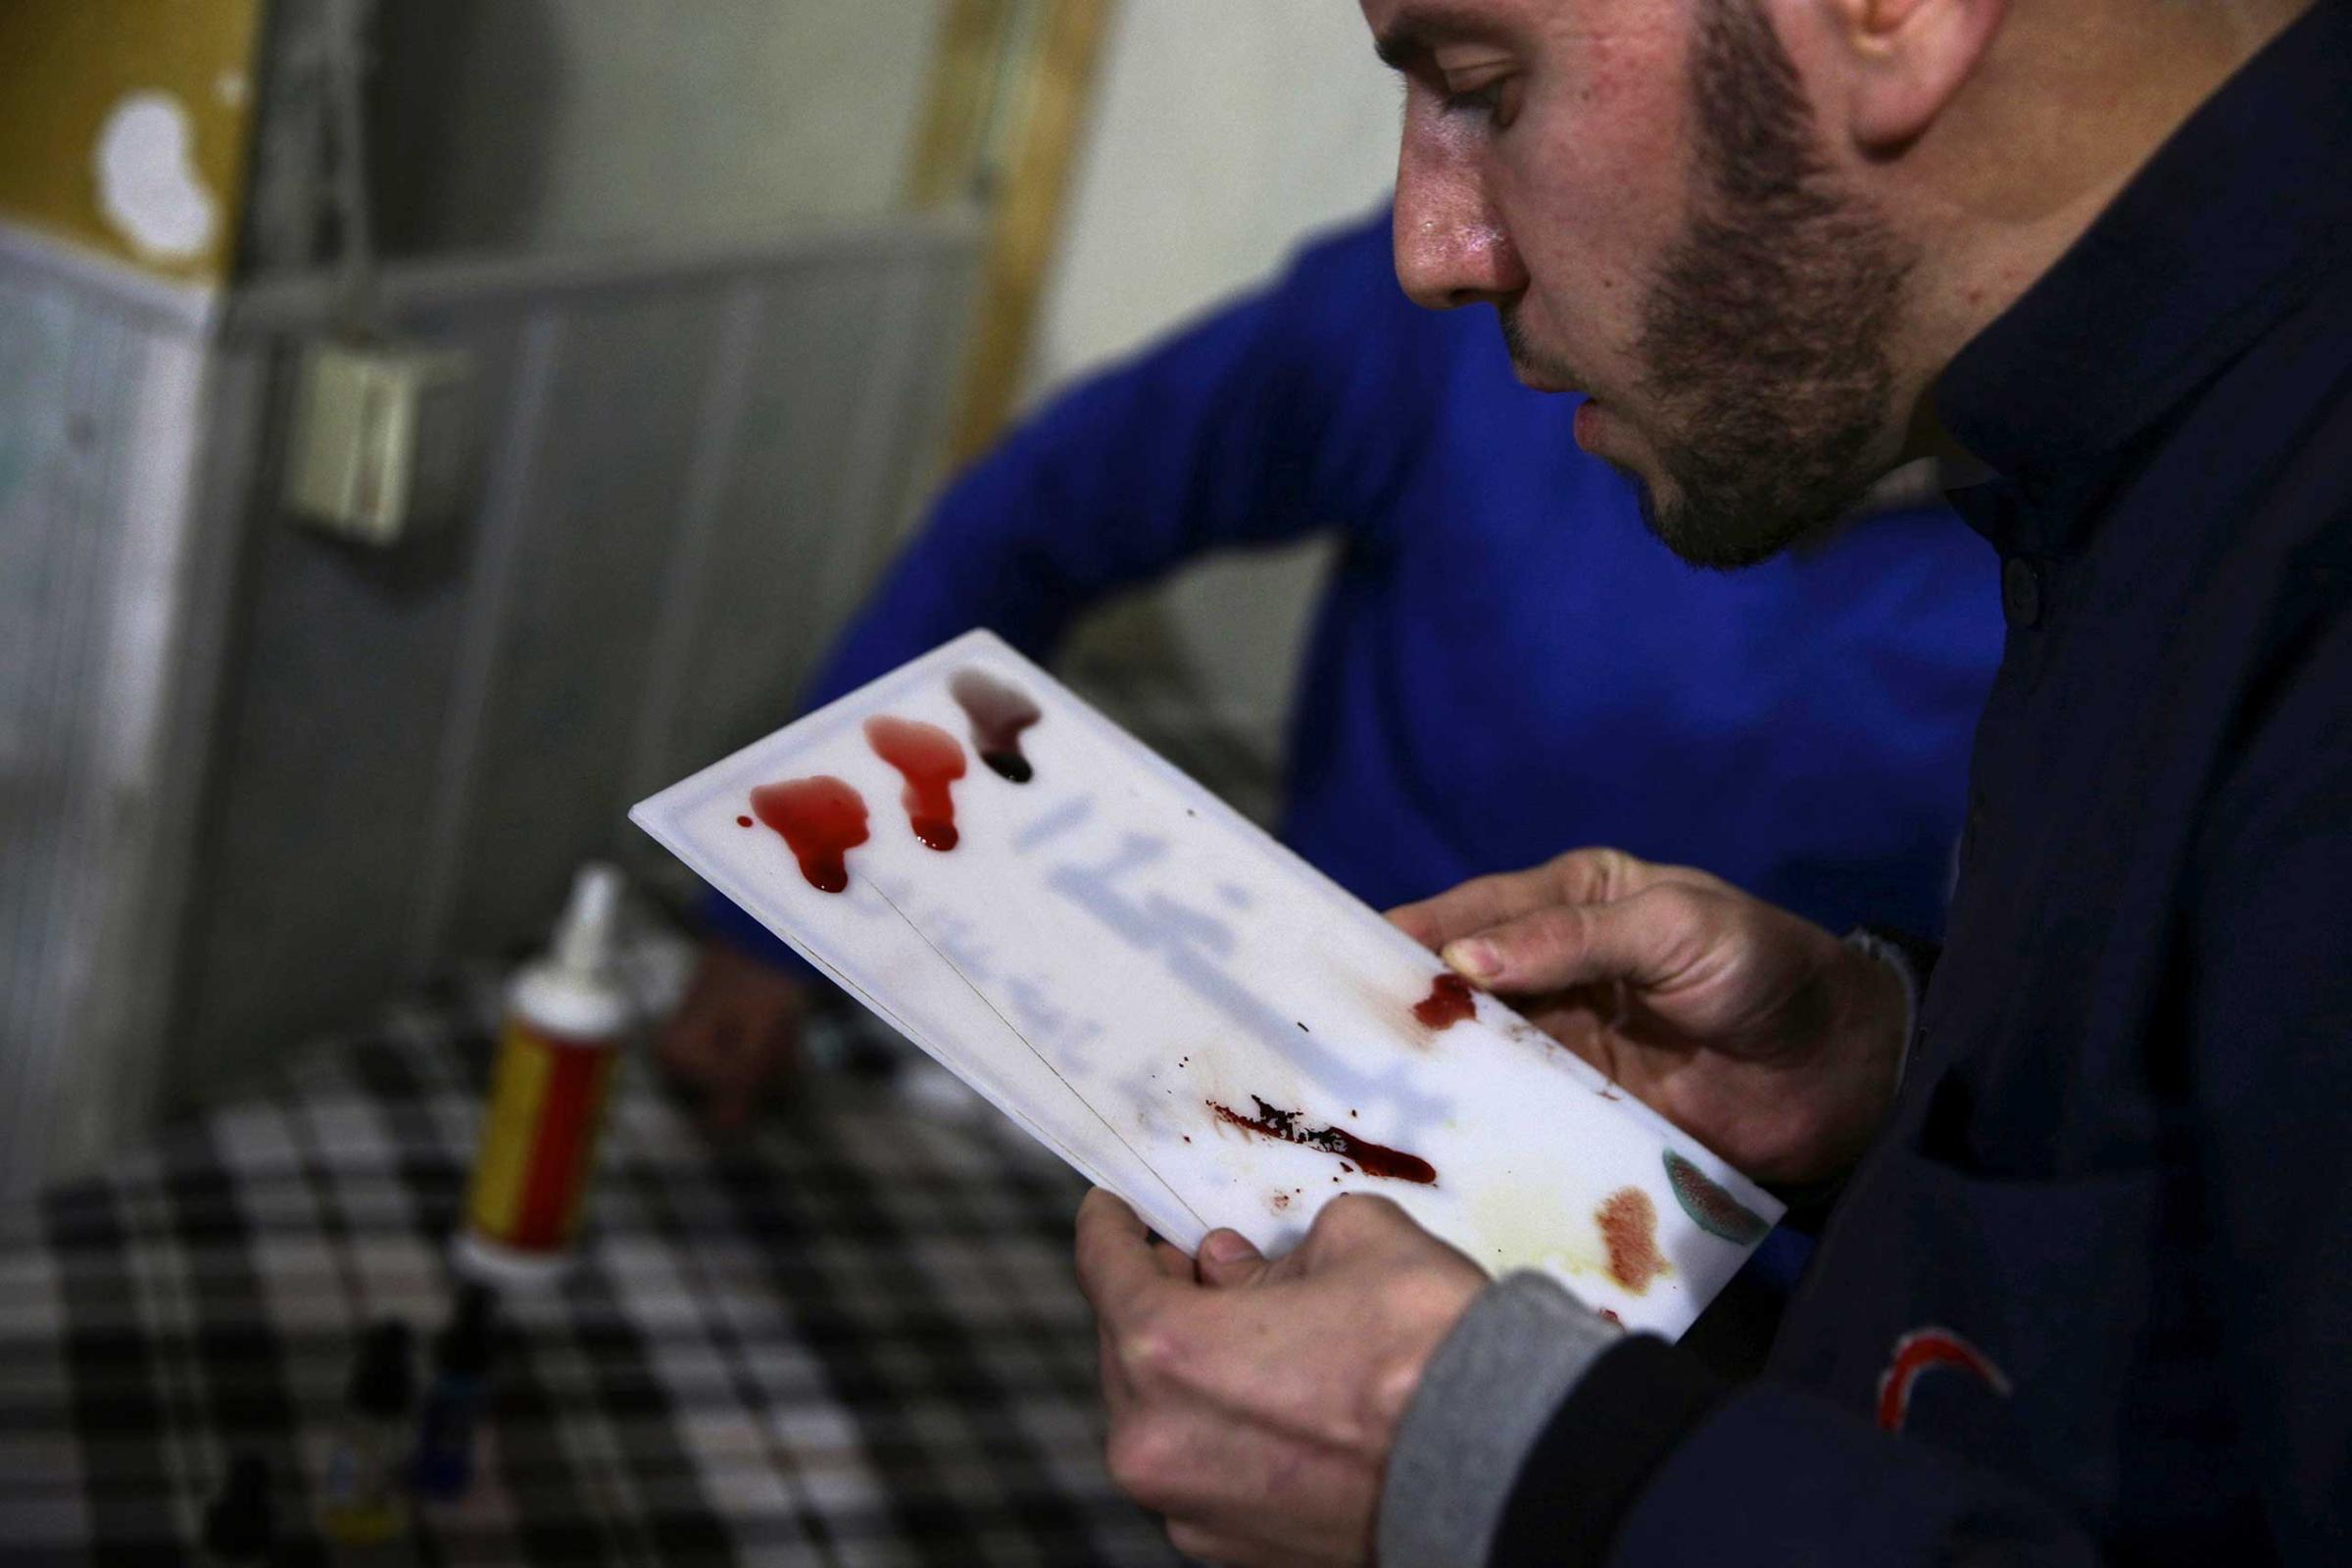 A medic tests patients' blood inside a field hospital in the Douma neighborhood of Damascus, Syria December 5, 2015.